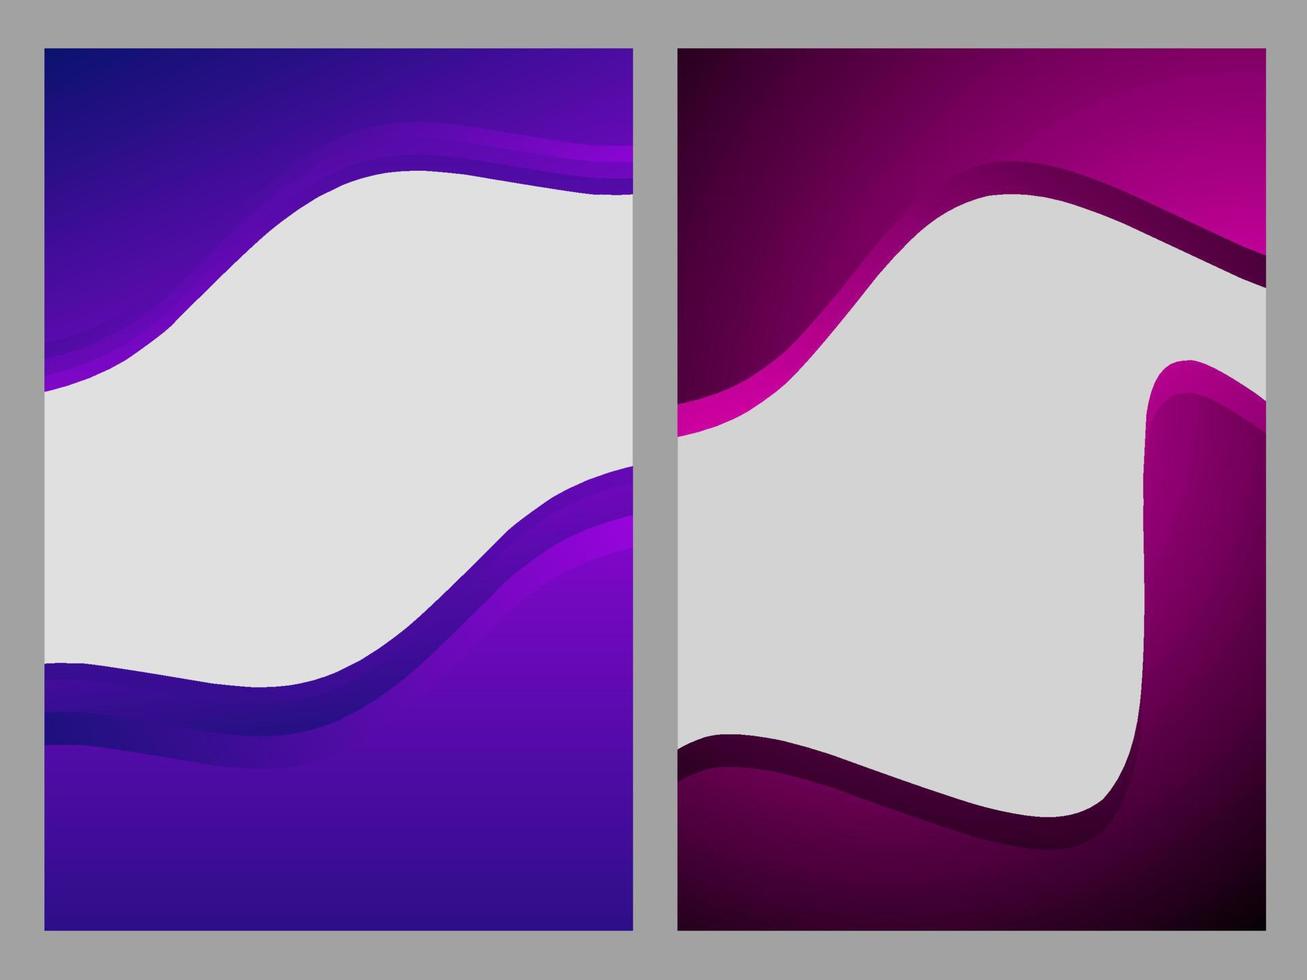 Abstract design background. Gradient vector design for use on the web, posters, ID cards, etc.